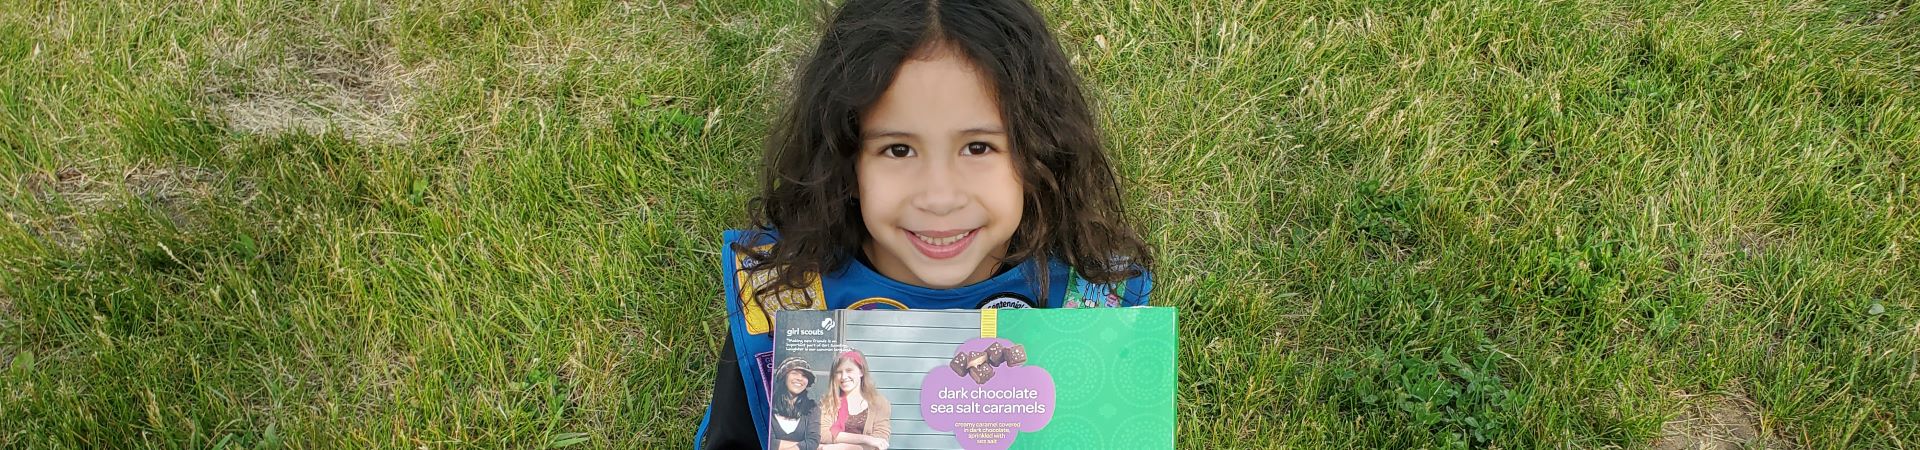  Girl Scout smiling and holding a box of candy 